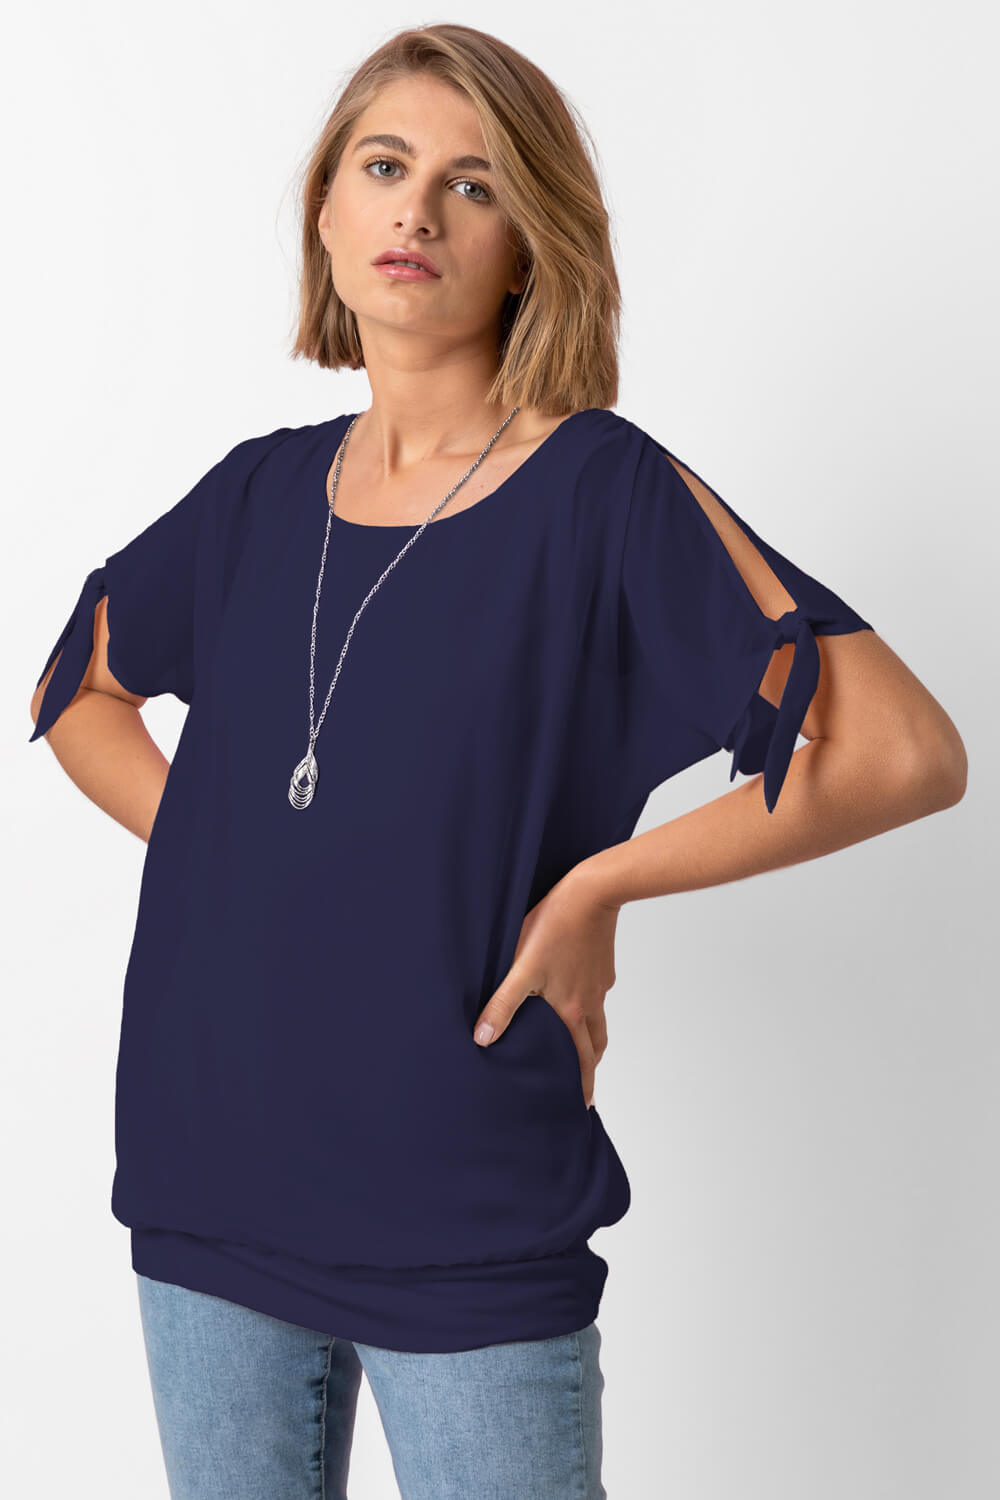 Chiffon Layered Tie Detail Top with Necklace